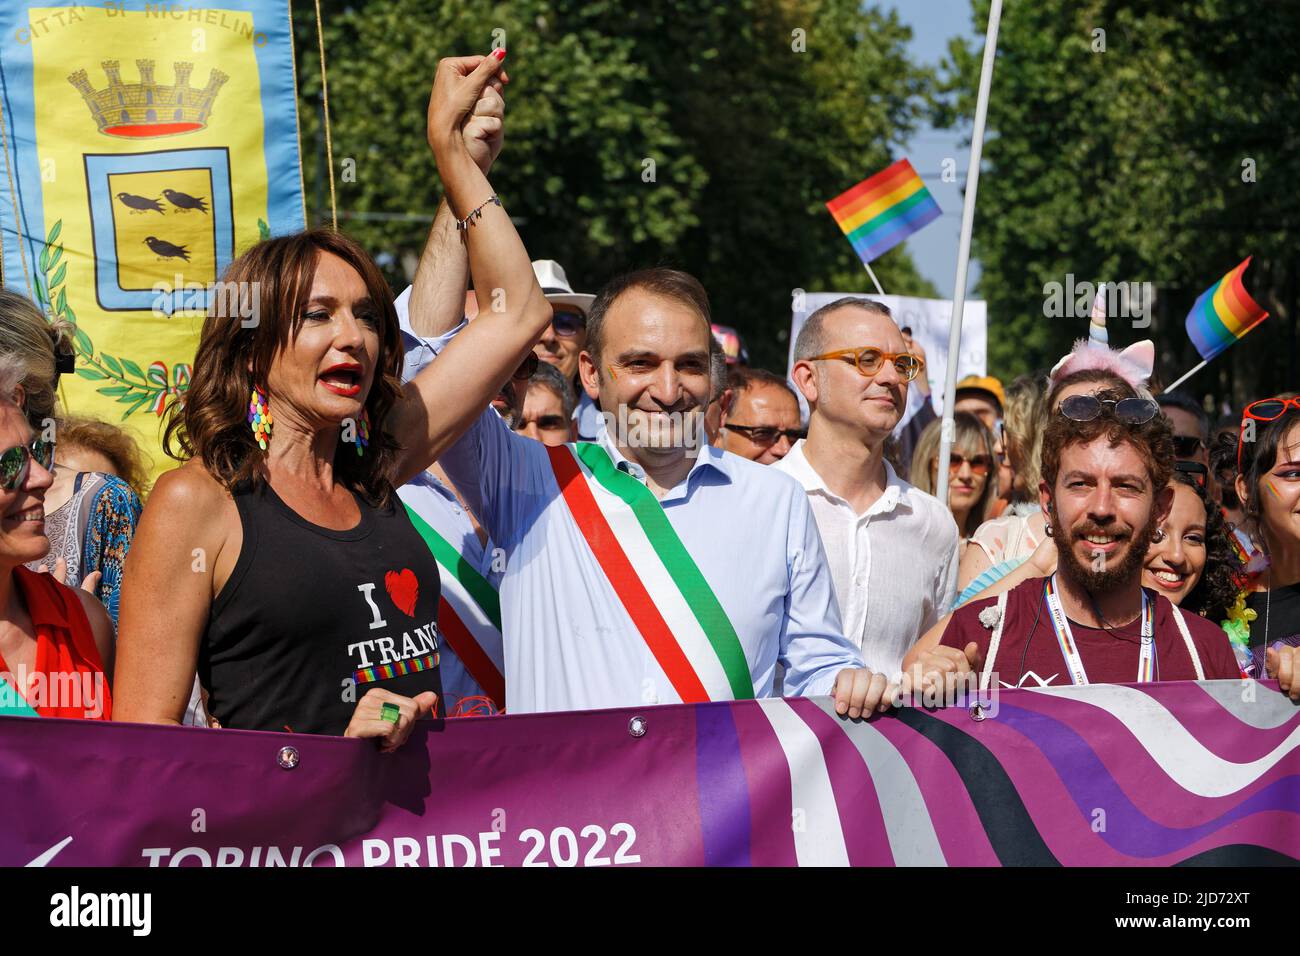 Turin, Italy. 18th June, 2022. The personalities (from the left: activist Vladimir Luxuria, Major Stefano Lo Russo, Council member Jacopo Rosatelli, coordinator Marco Giusta)walk at the head of the Torino Pride 2022 parade. Credit: MLBARIONA/Alamy Live News Stock Photo